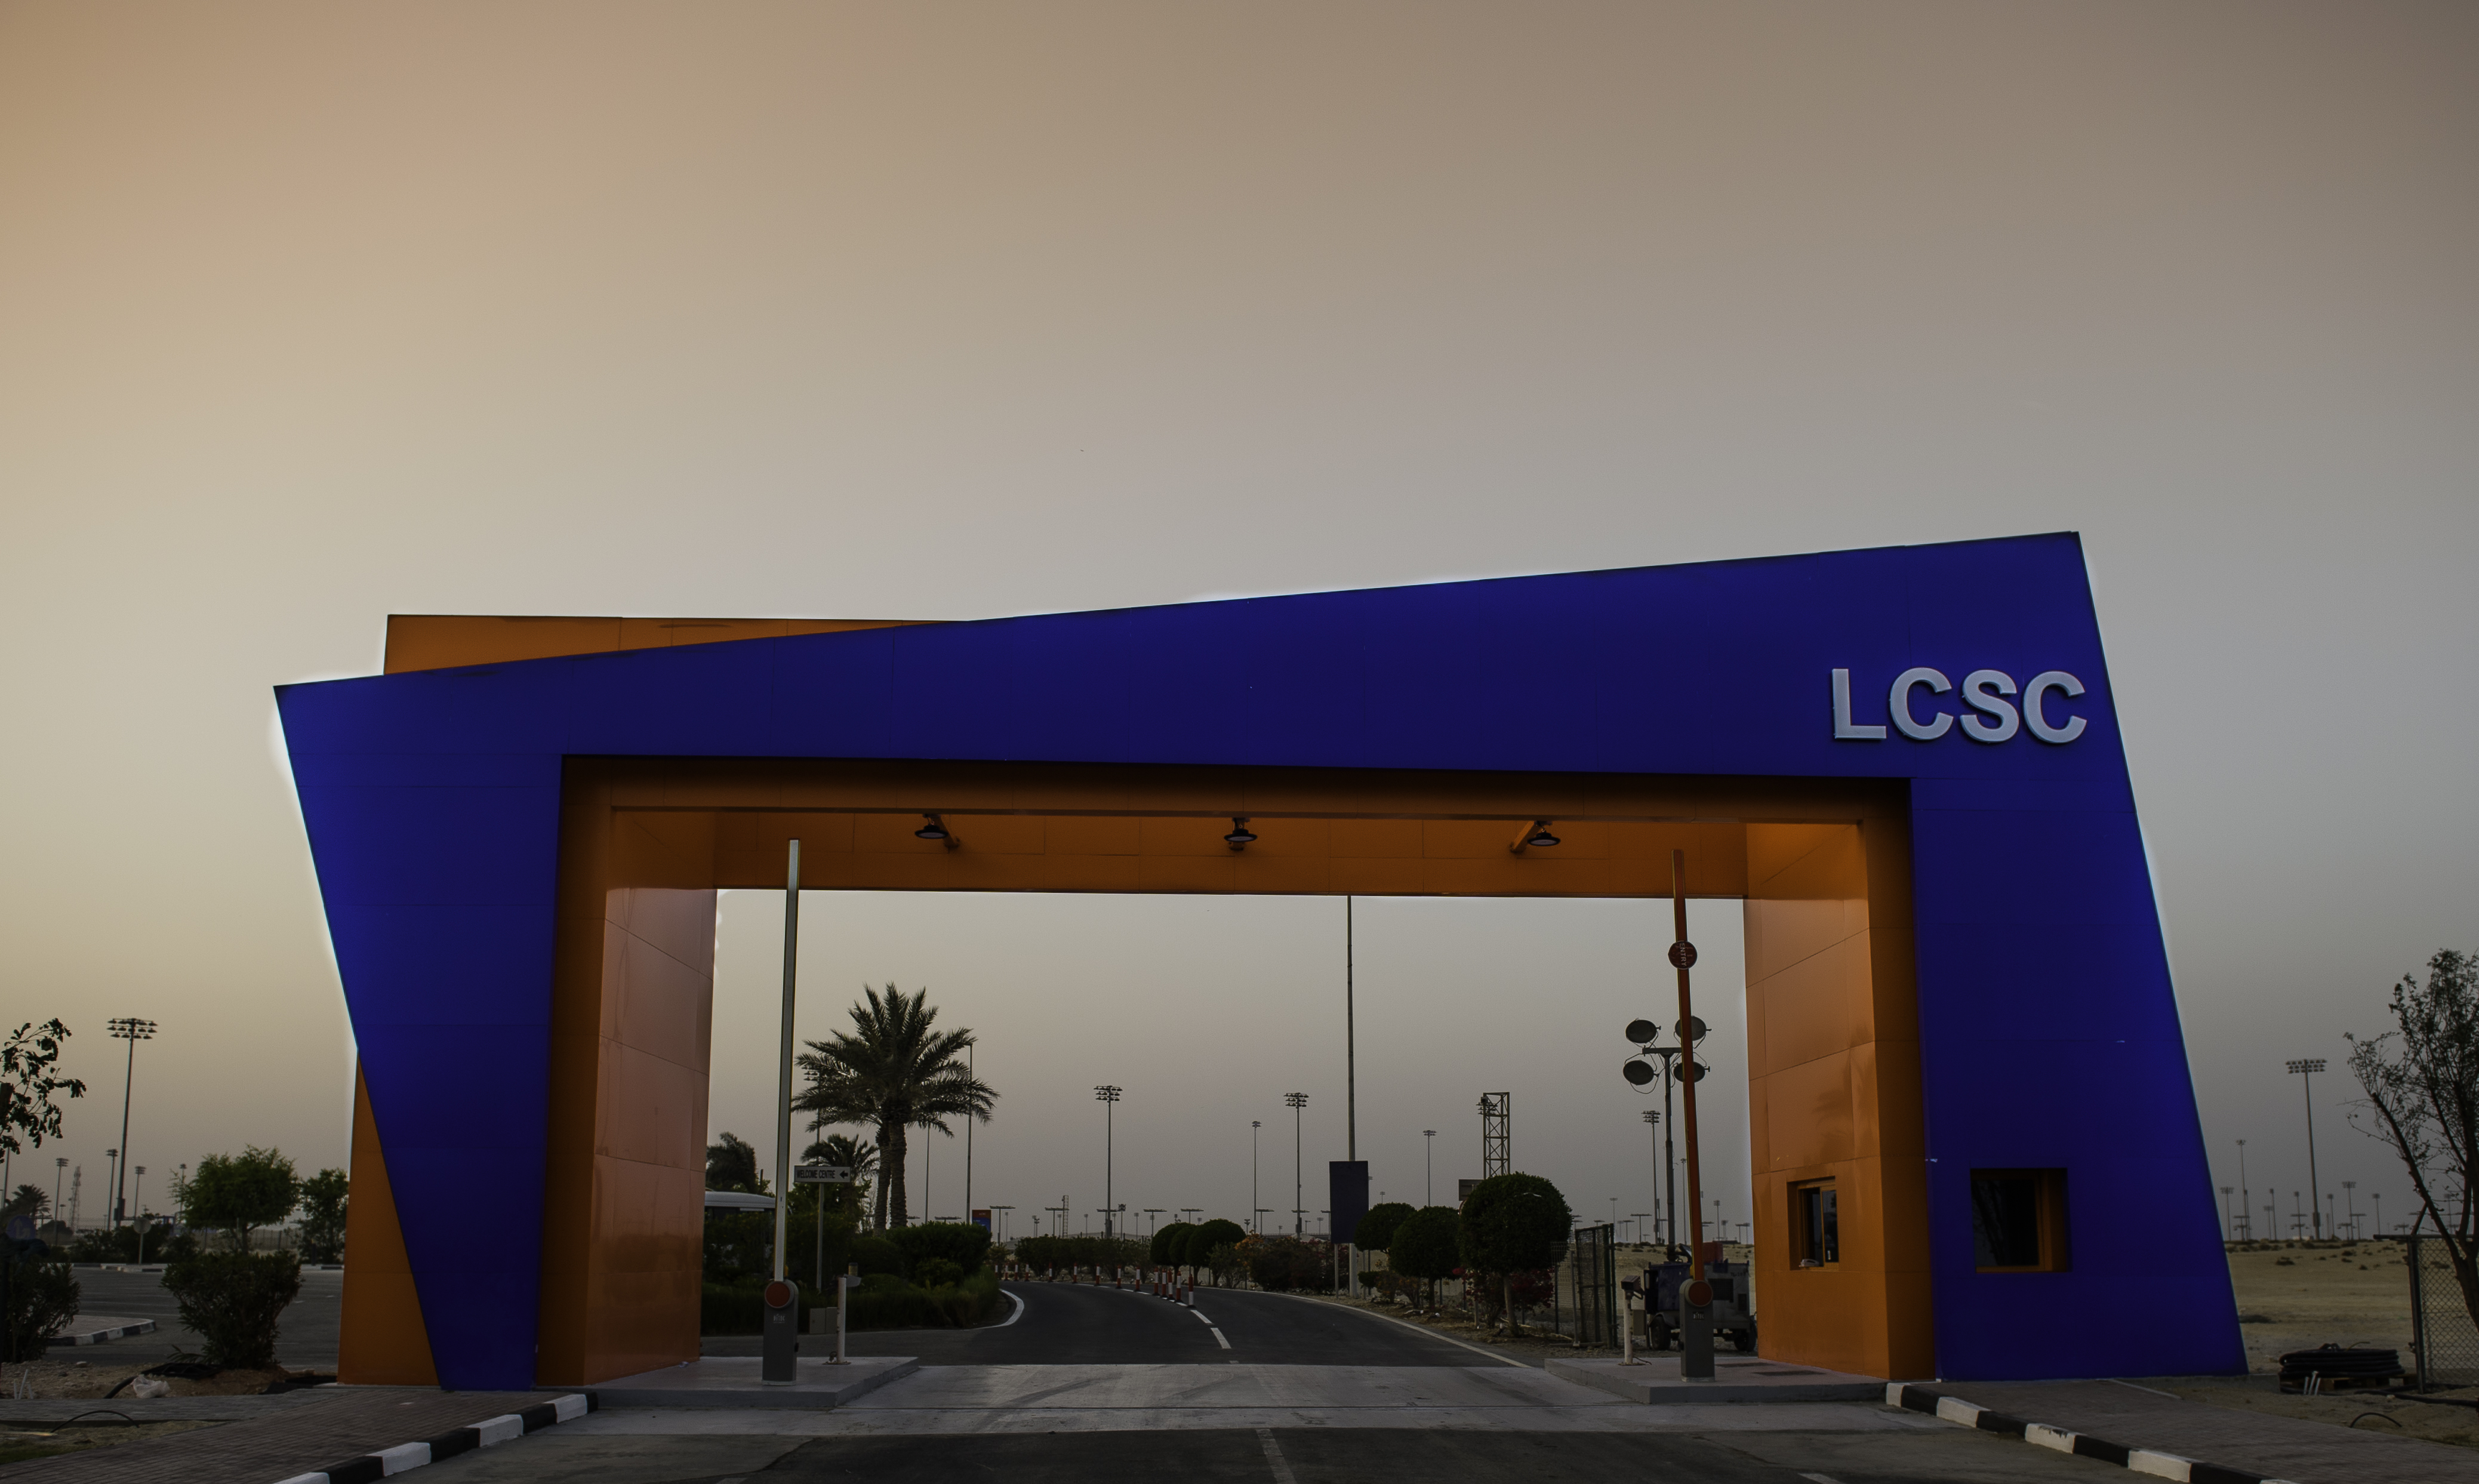 All routes lead to Lusail Circuit Sports Club as Qatar gets set for F1 debut